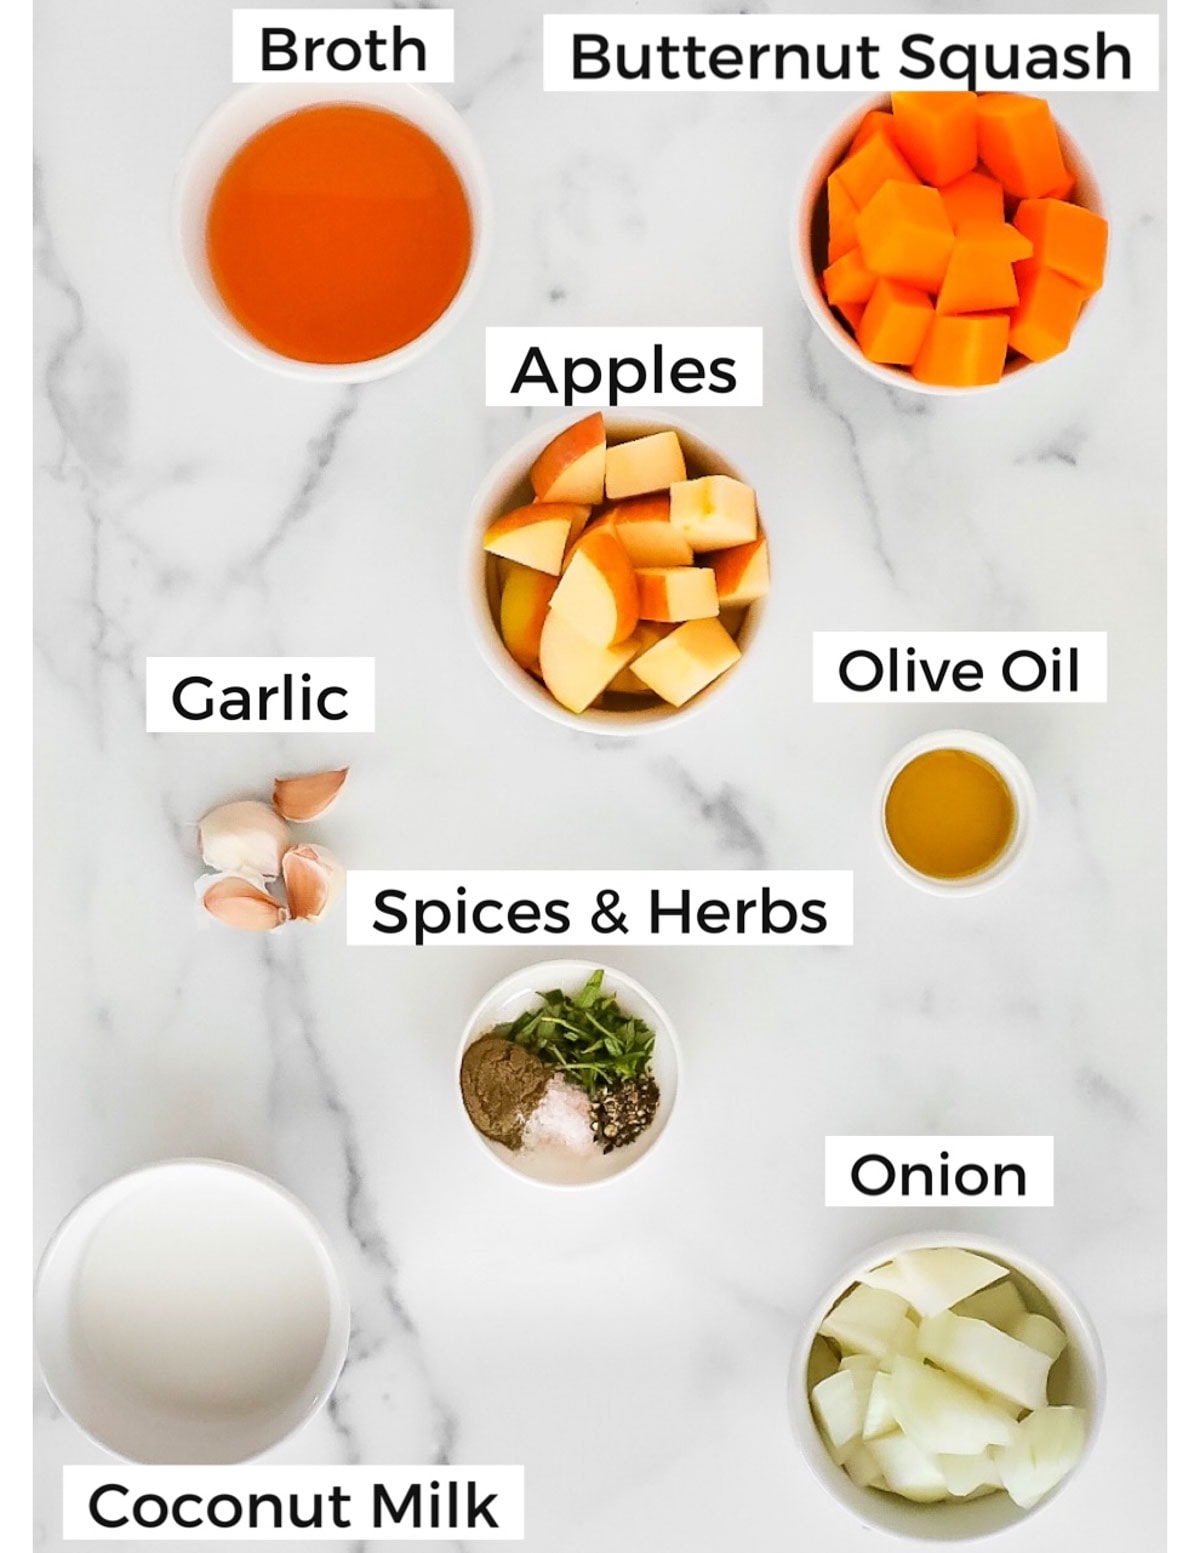 Labeled ingredients in small white bowls including: broth, butternut squash, apples, olive oil, garlic, spices and herbs, onion, and coconut milk